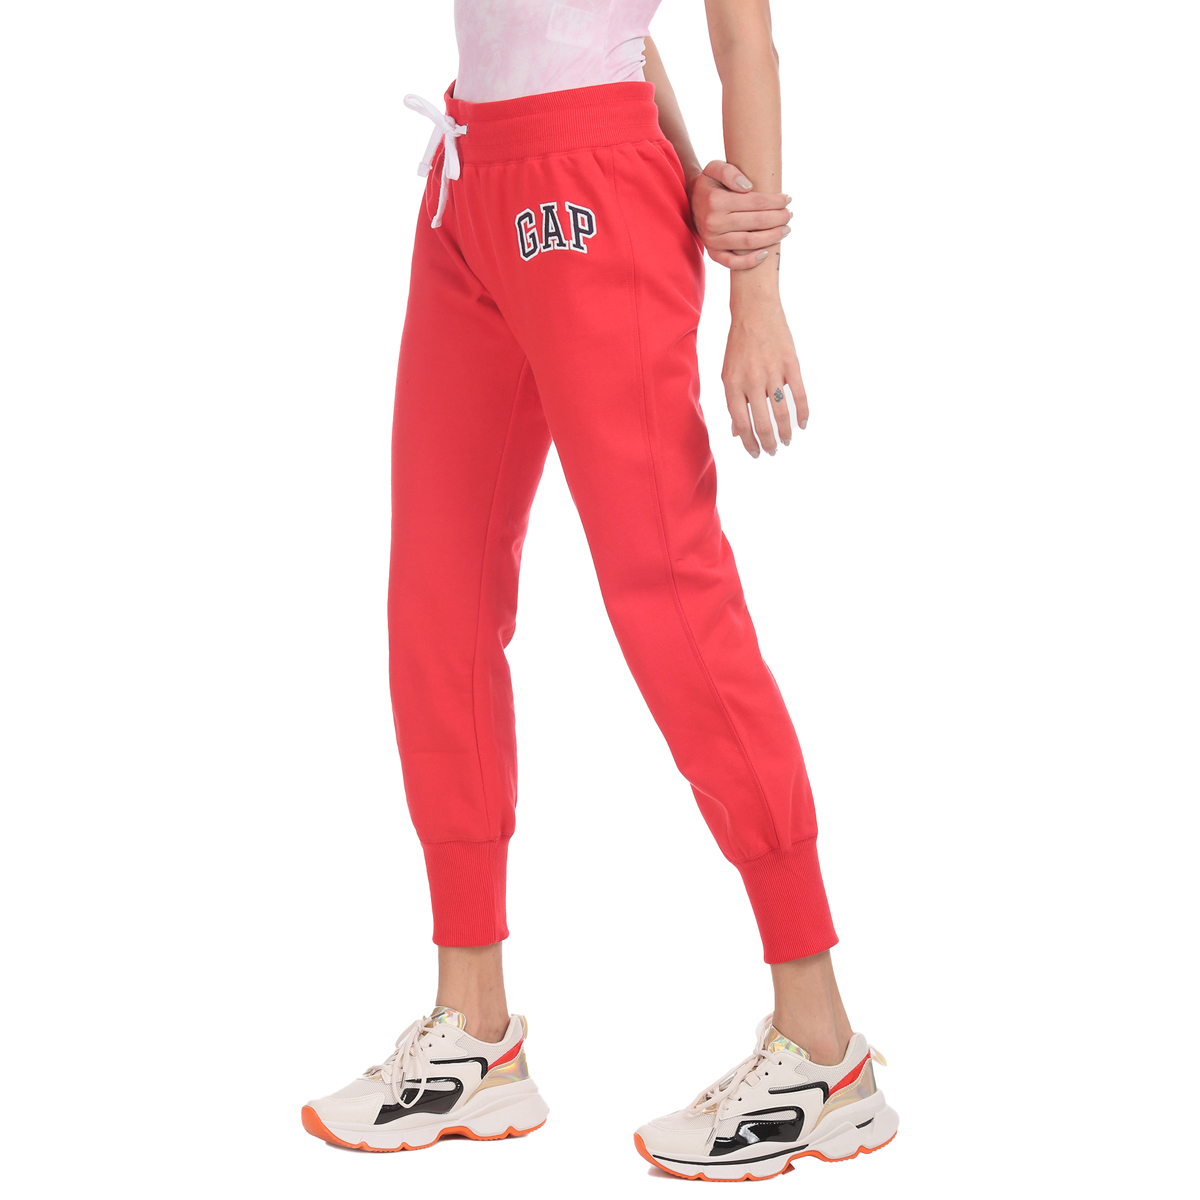 Gap Mid Rise Regular Fit Soft Cozy Fleece Knitted Solid Color Jogger Styled with Applique Worked Logo - Red